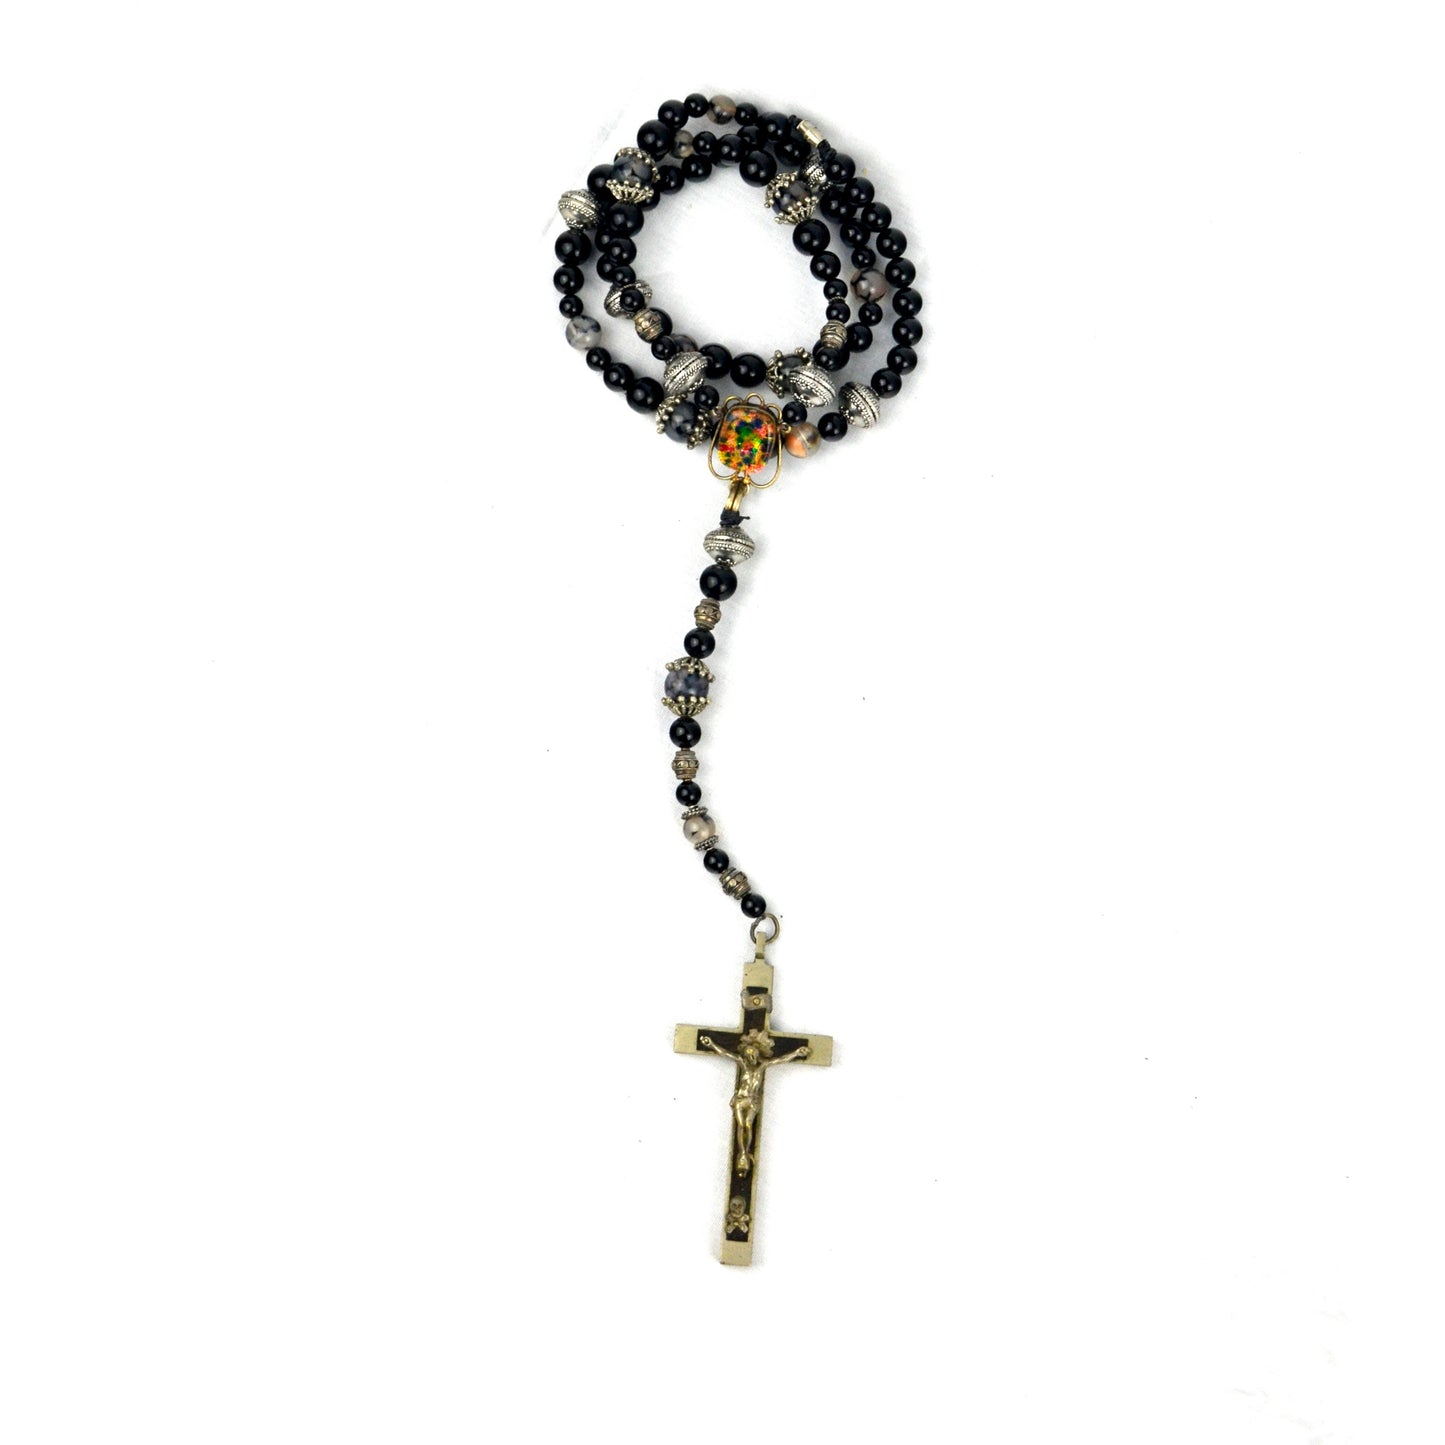 Black Onyx, Dichroic Glass, Rosary Necklace by J.J. Dean